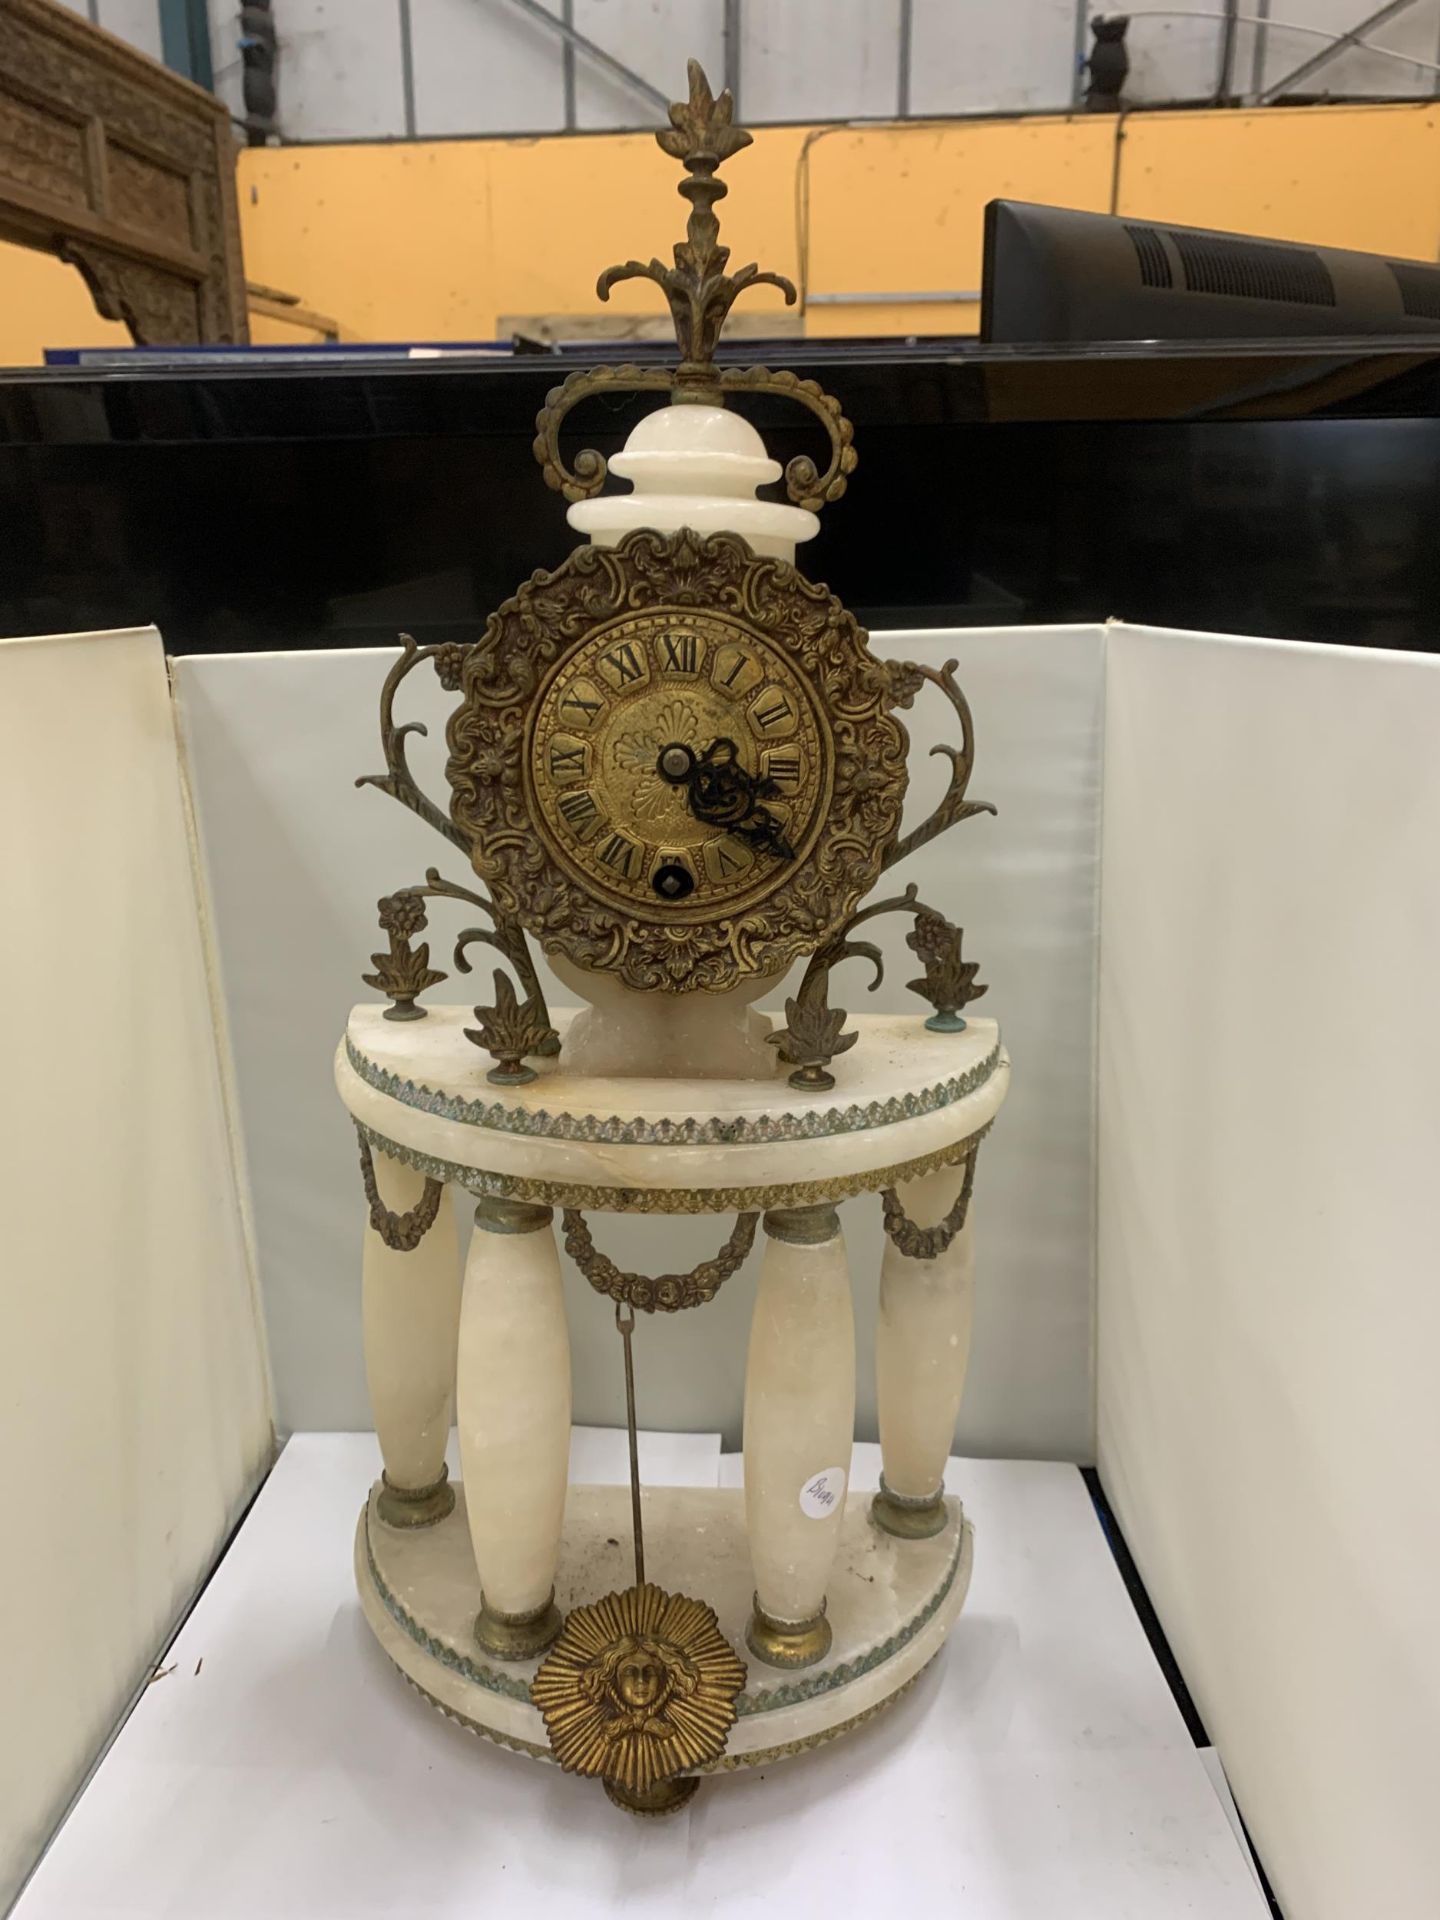 A PORTICO CLOCK LOUIS XVI STYLE IN WHITE MARBLE WITH GILDED BRONZE. A HALF MOON SHAPED PORTICO